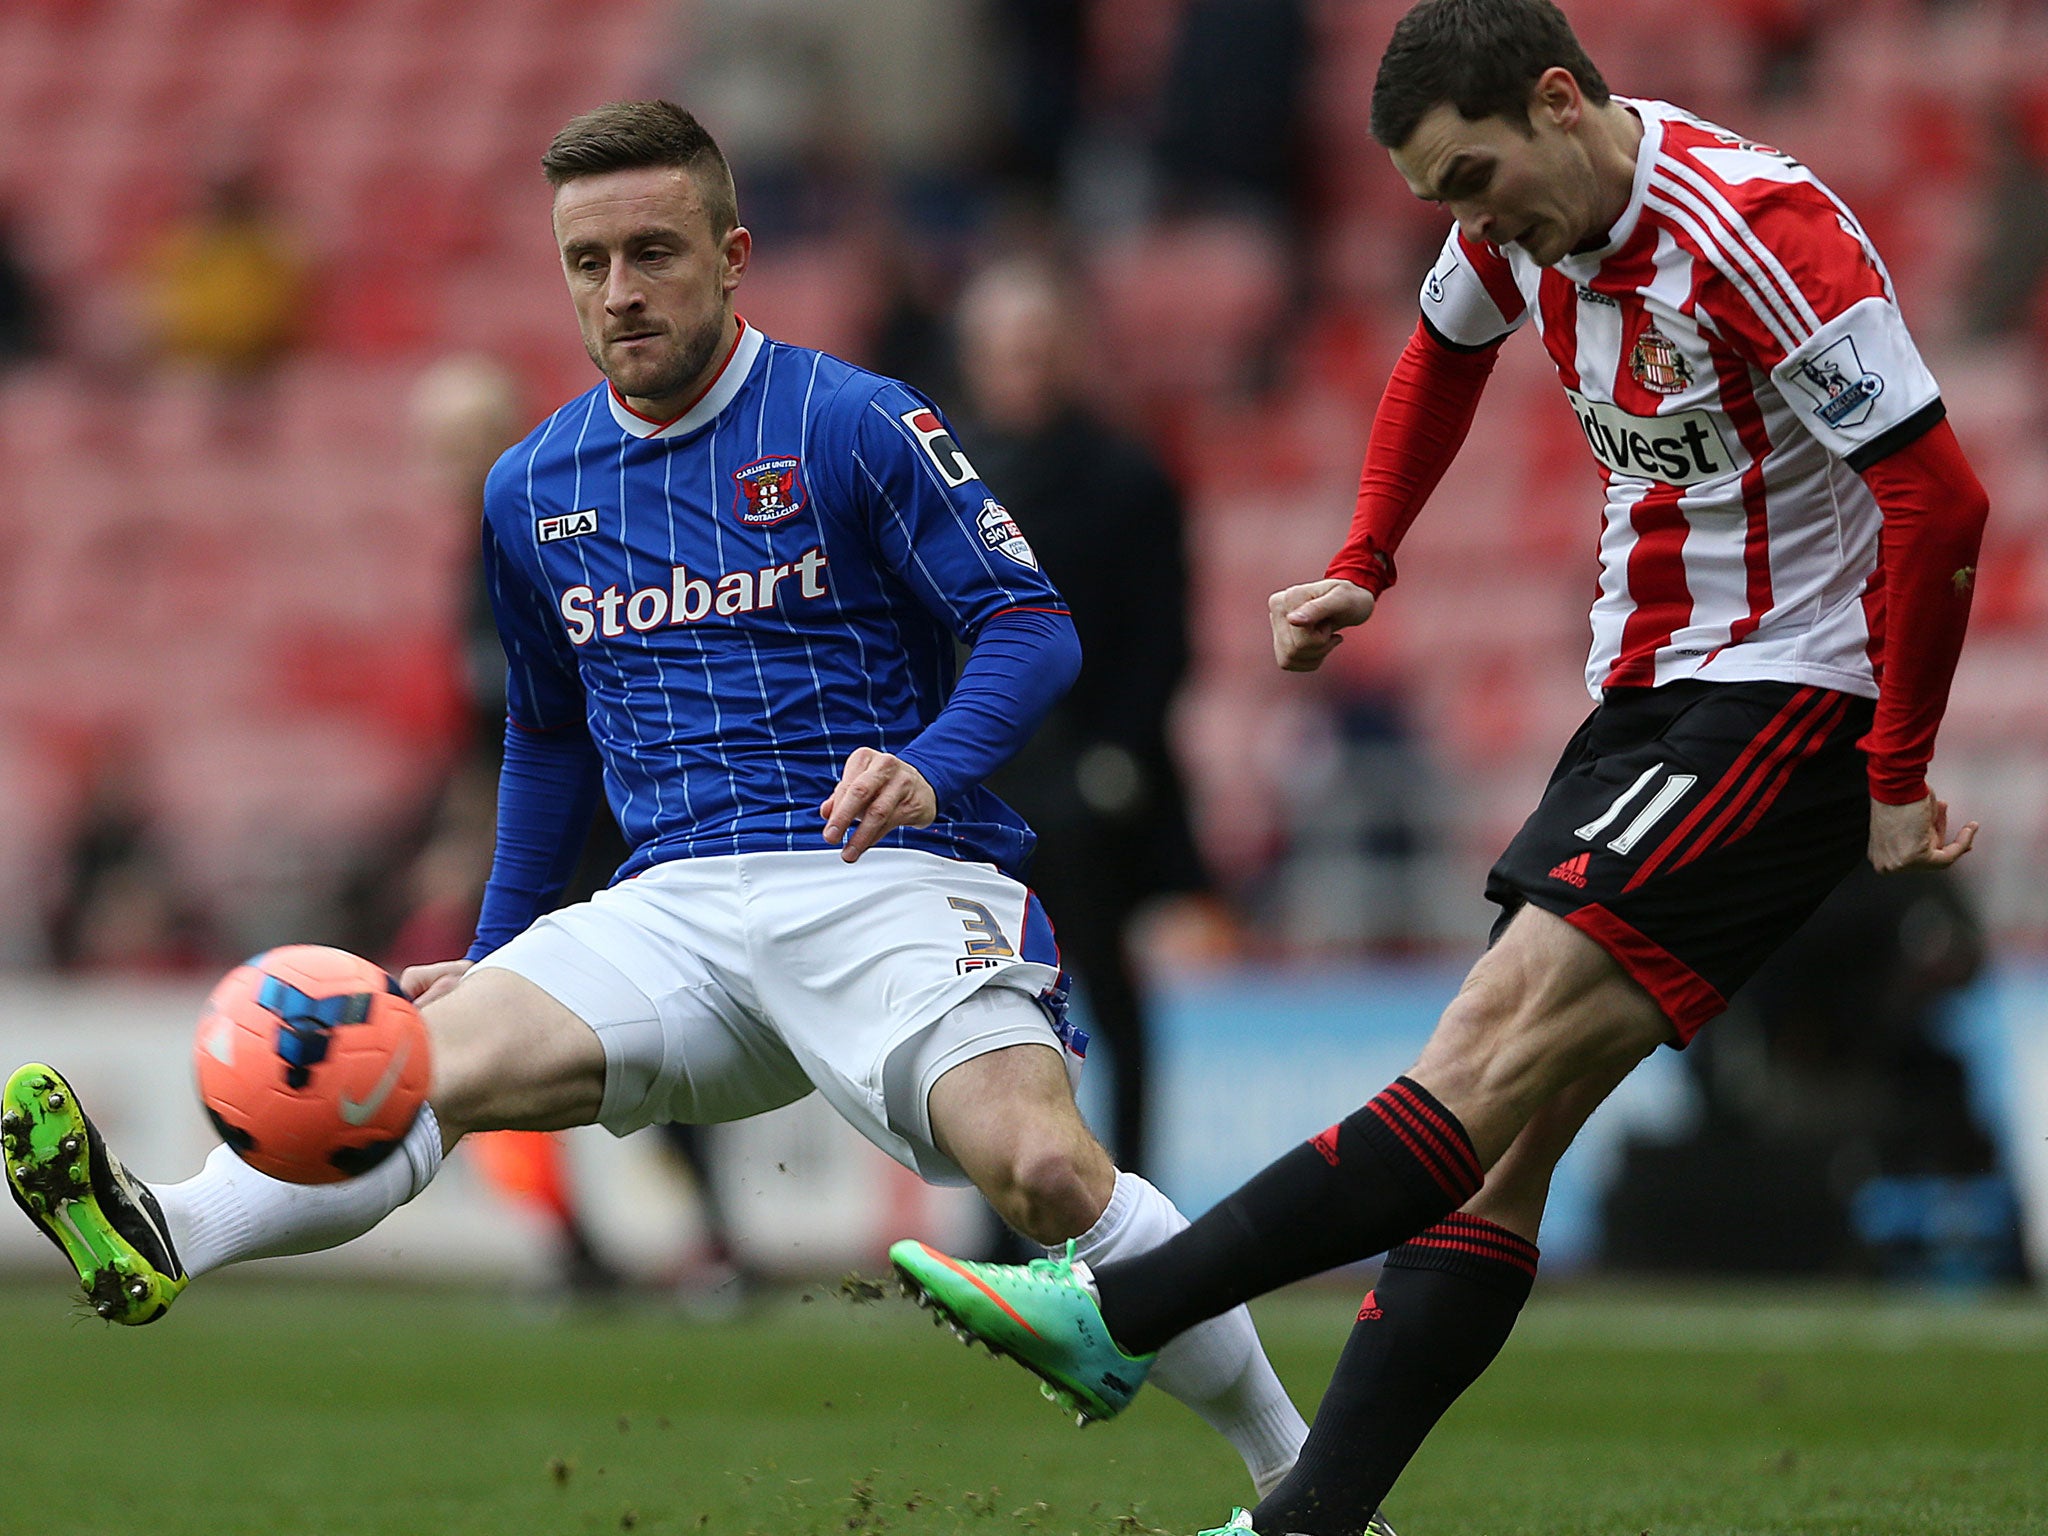 Carlisle United's Matty Robson (left) vies with Sunderland's Adam Johnson in the FA Cup clash on Sunday